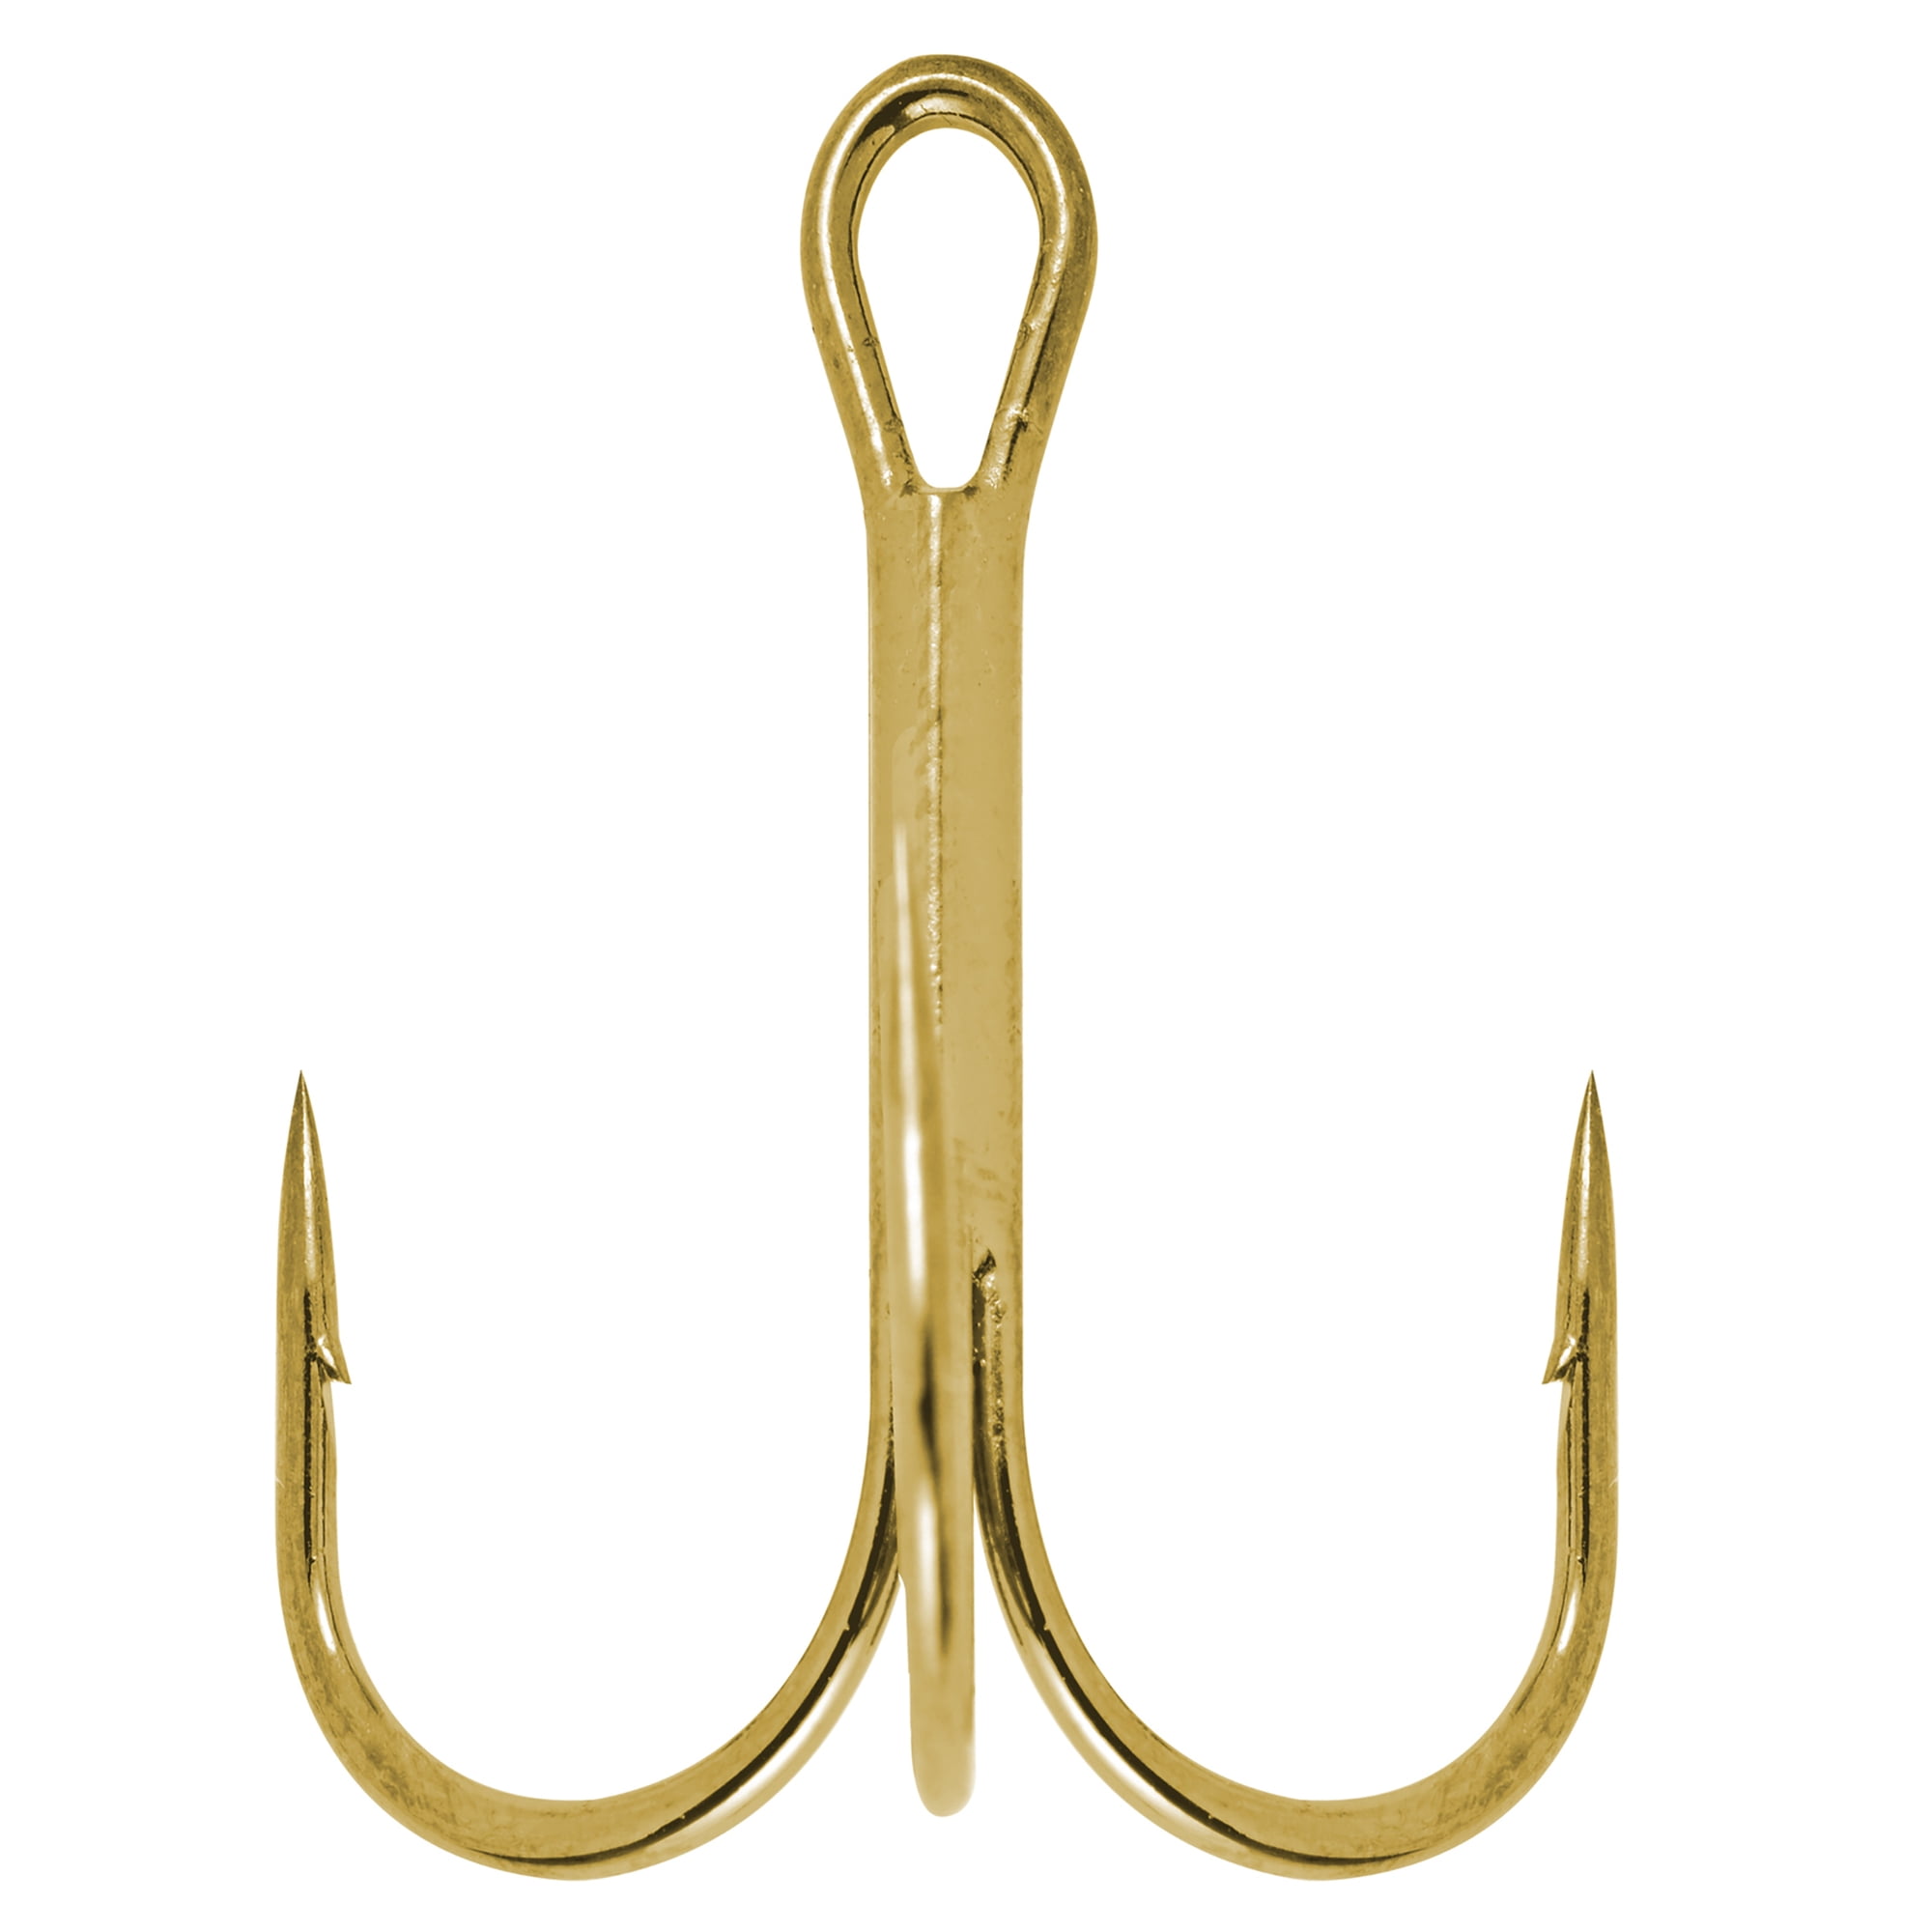 South Bend Gold Treble Hook - Size 14, 25 Count 